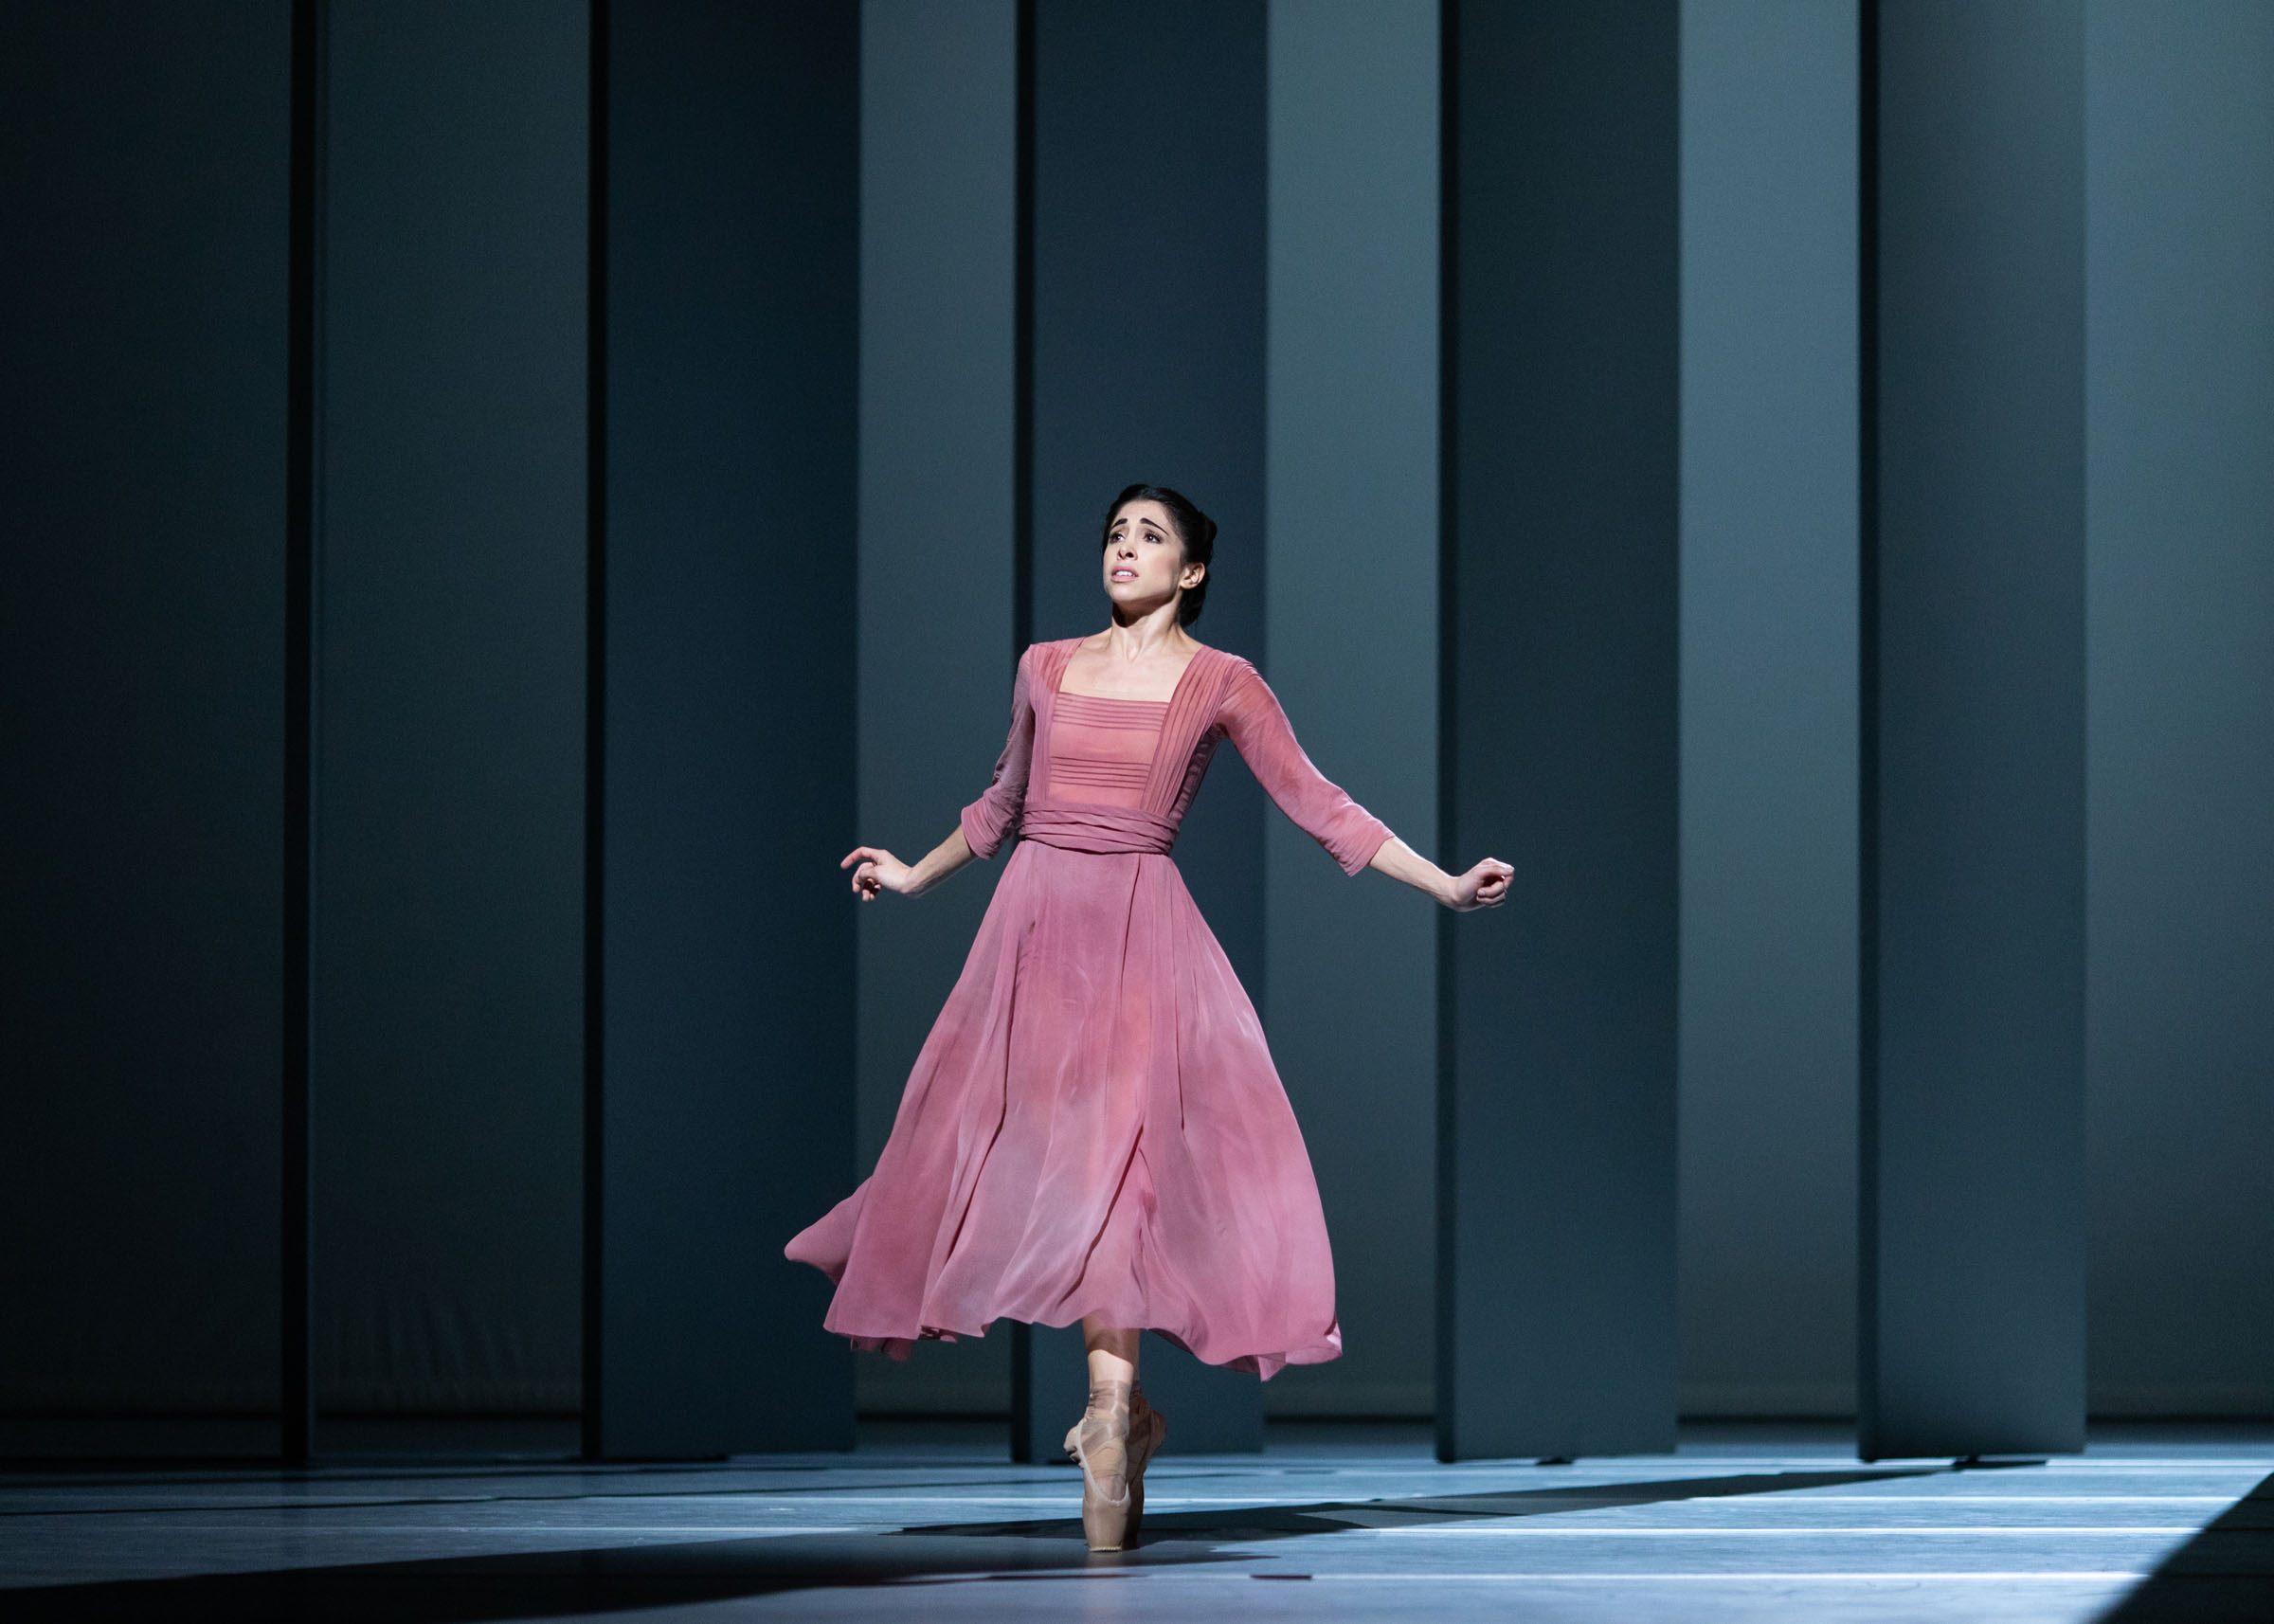 Yasmine Naghdi as Florence Billington in Alastair Marriott's The Unknown Soldier, The Royal Ballet